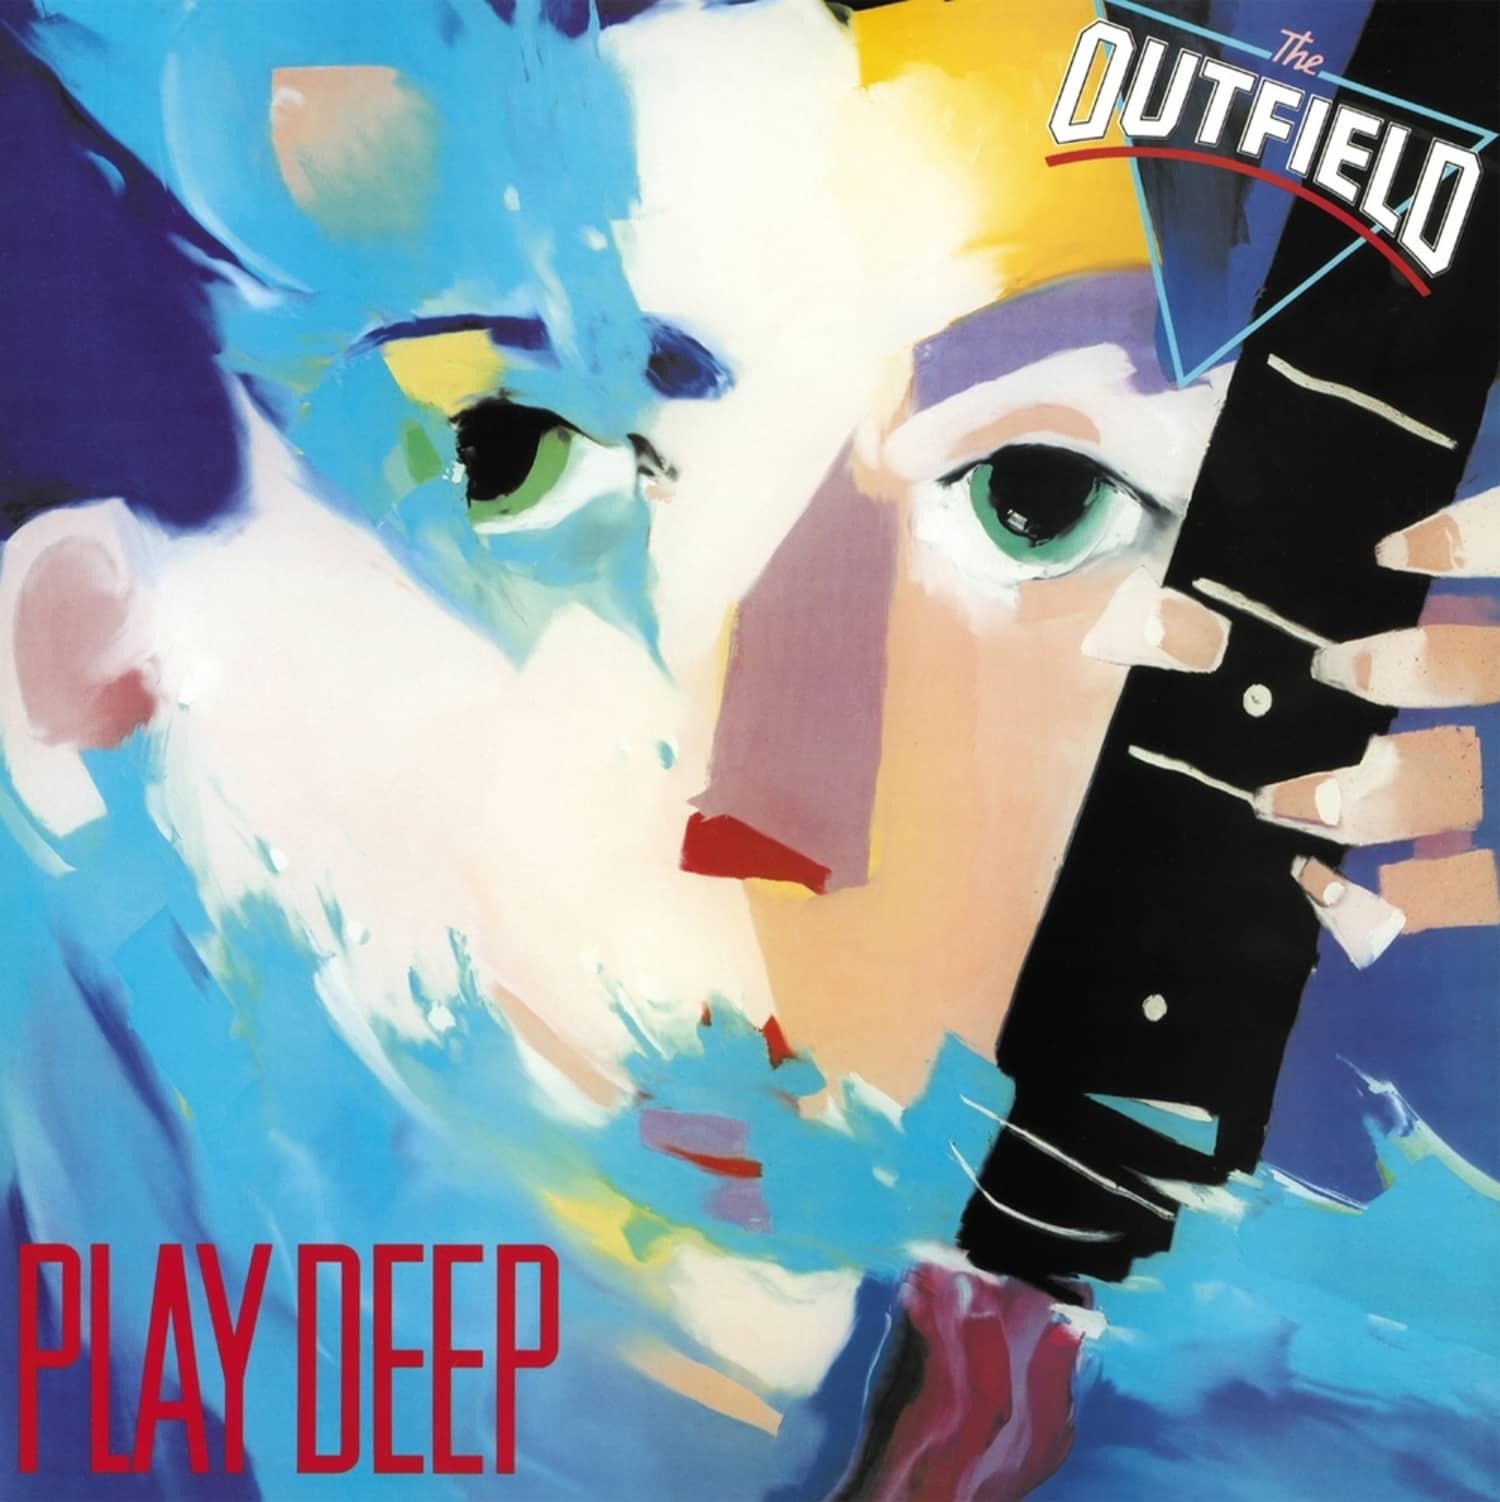 Outfield - PLAY DEEP 